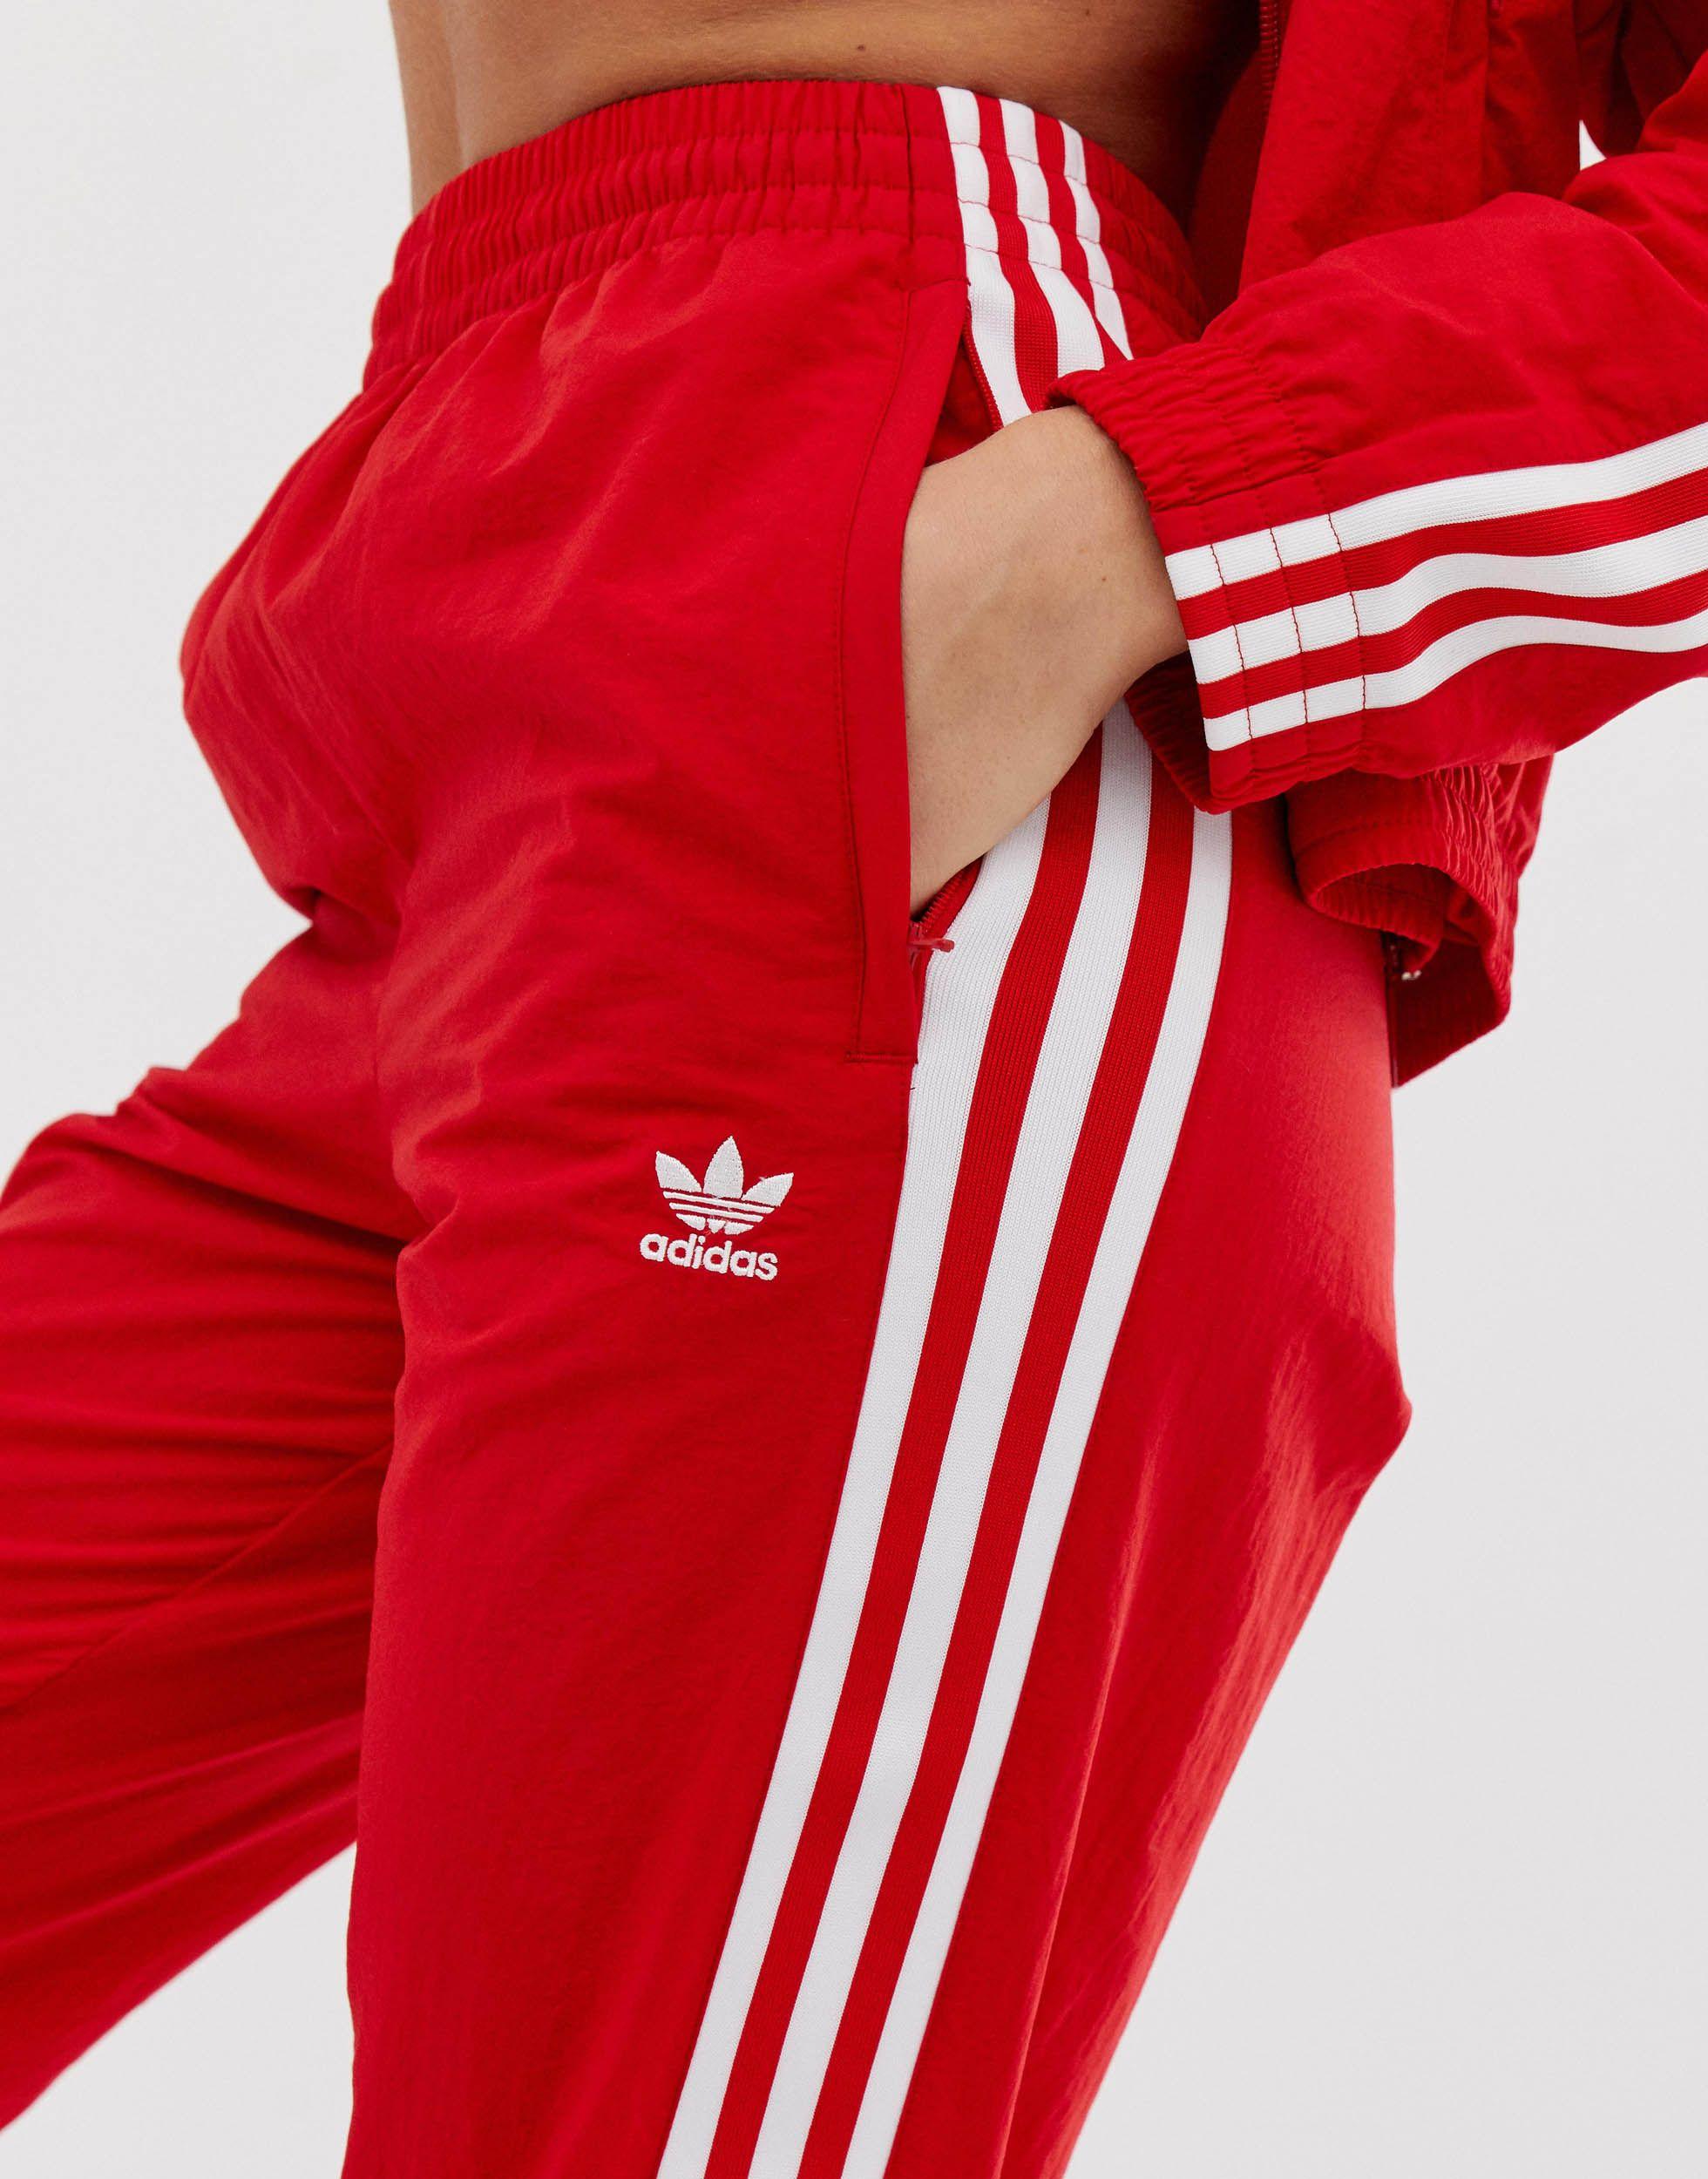 adidas original rouge homme, magnanimous disposition Save 82% available -  www.jubailhospital.com